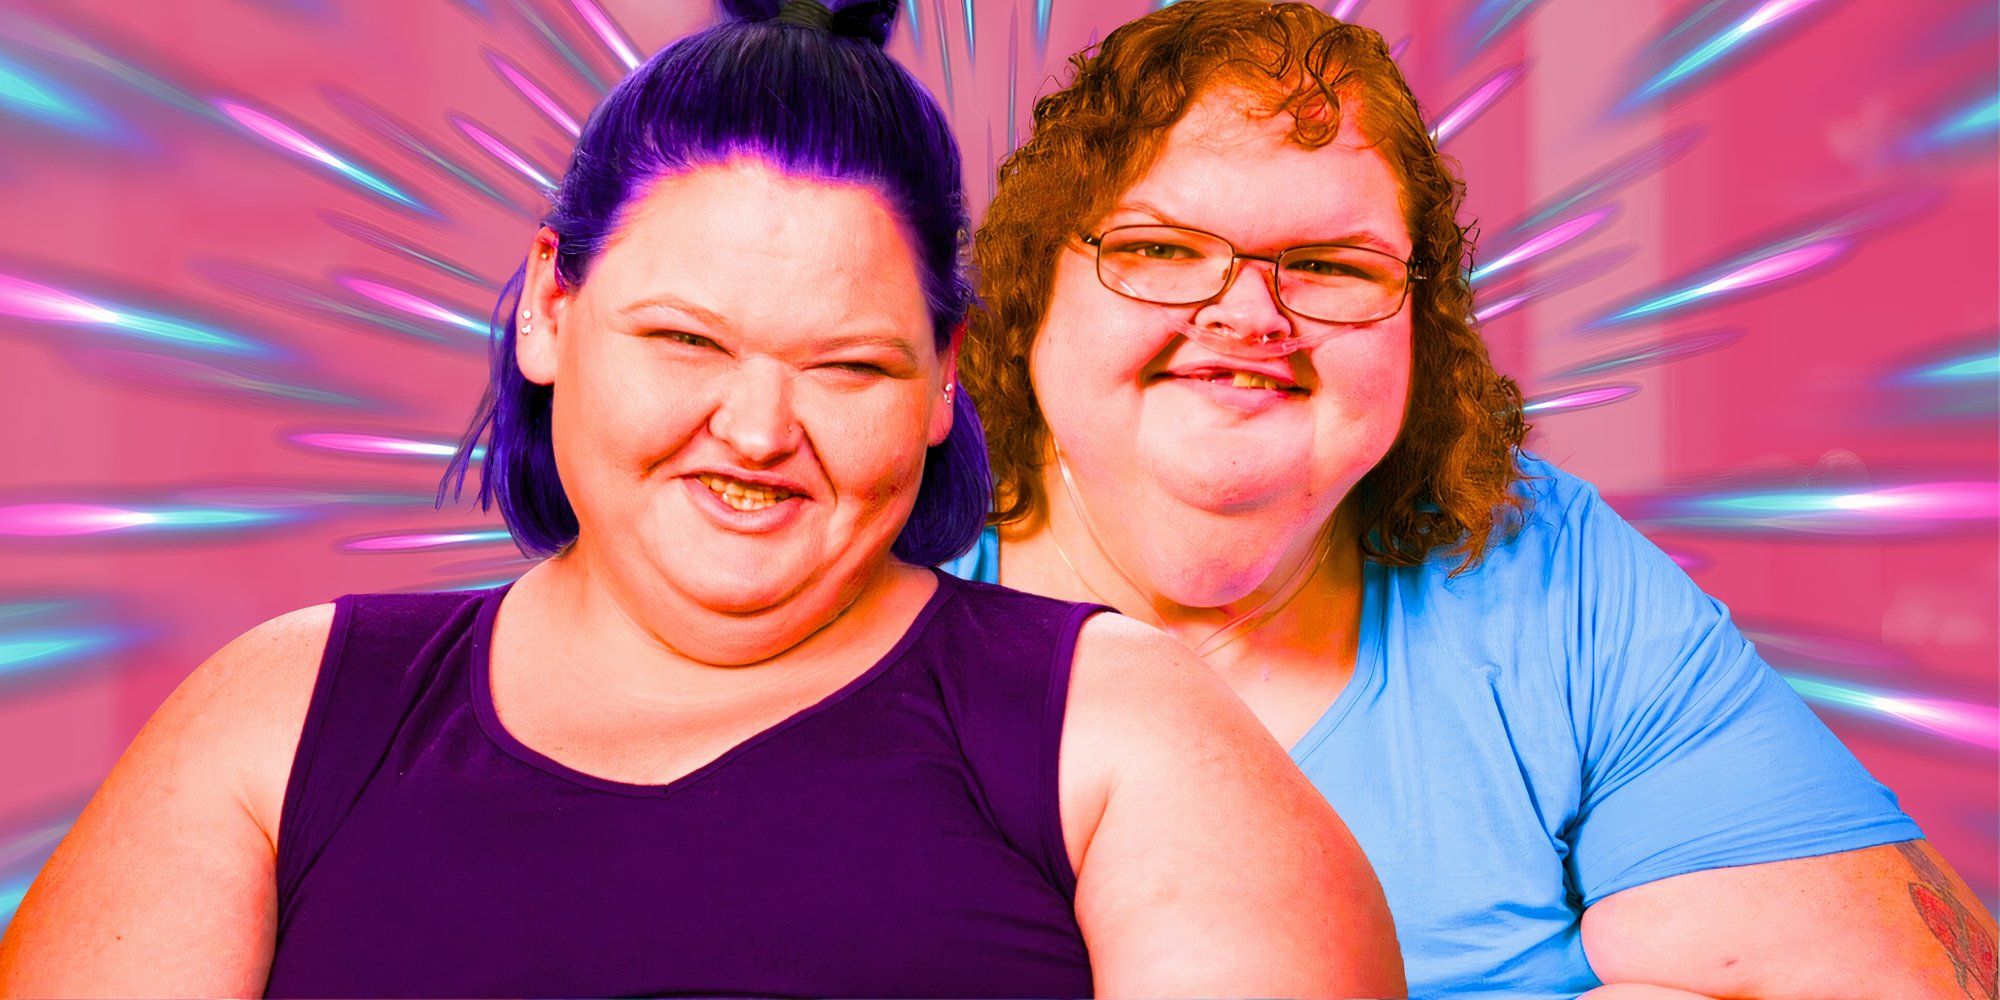 1000-Lb Sisters stars Amy & Tammy Slaton smiling with pink background